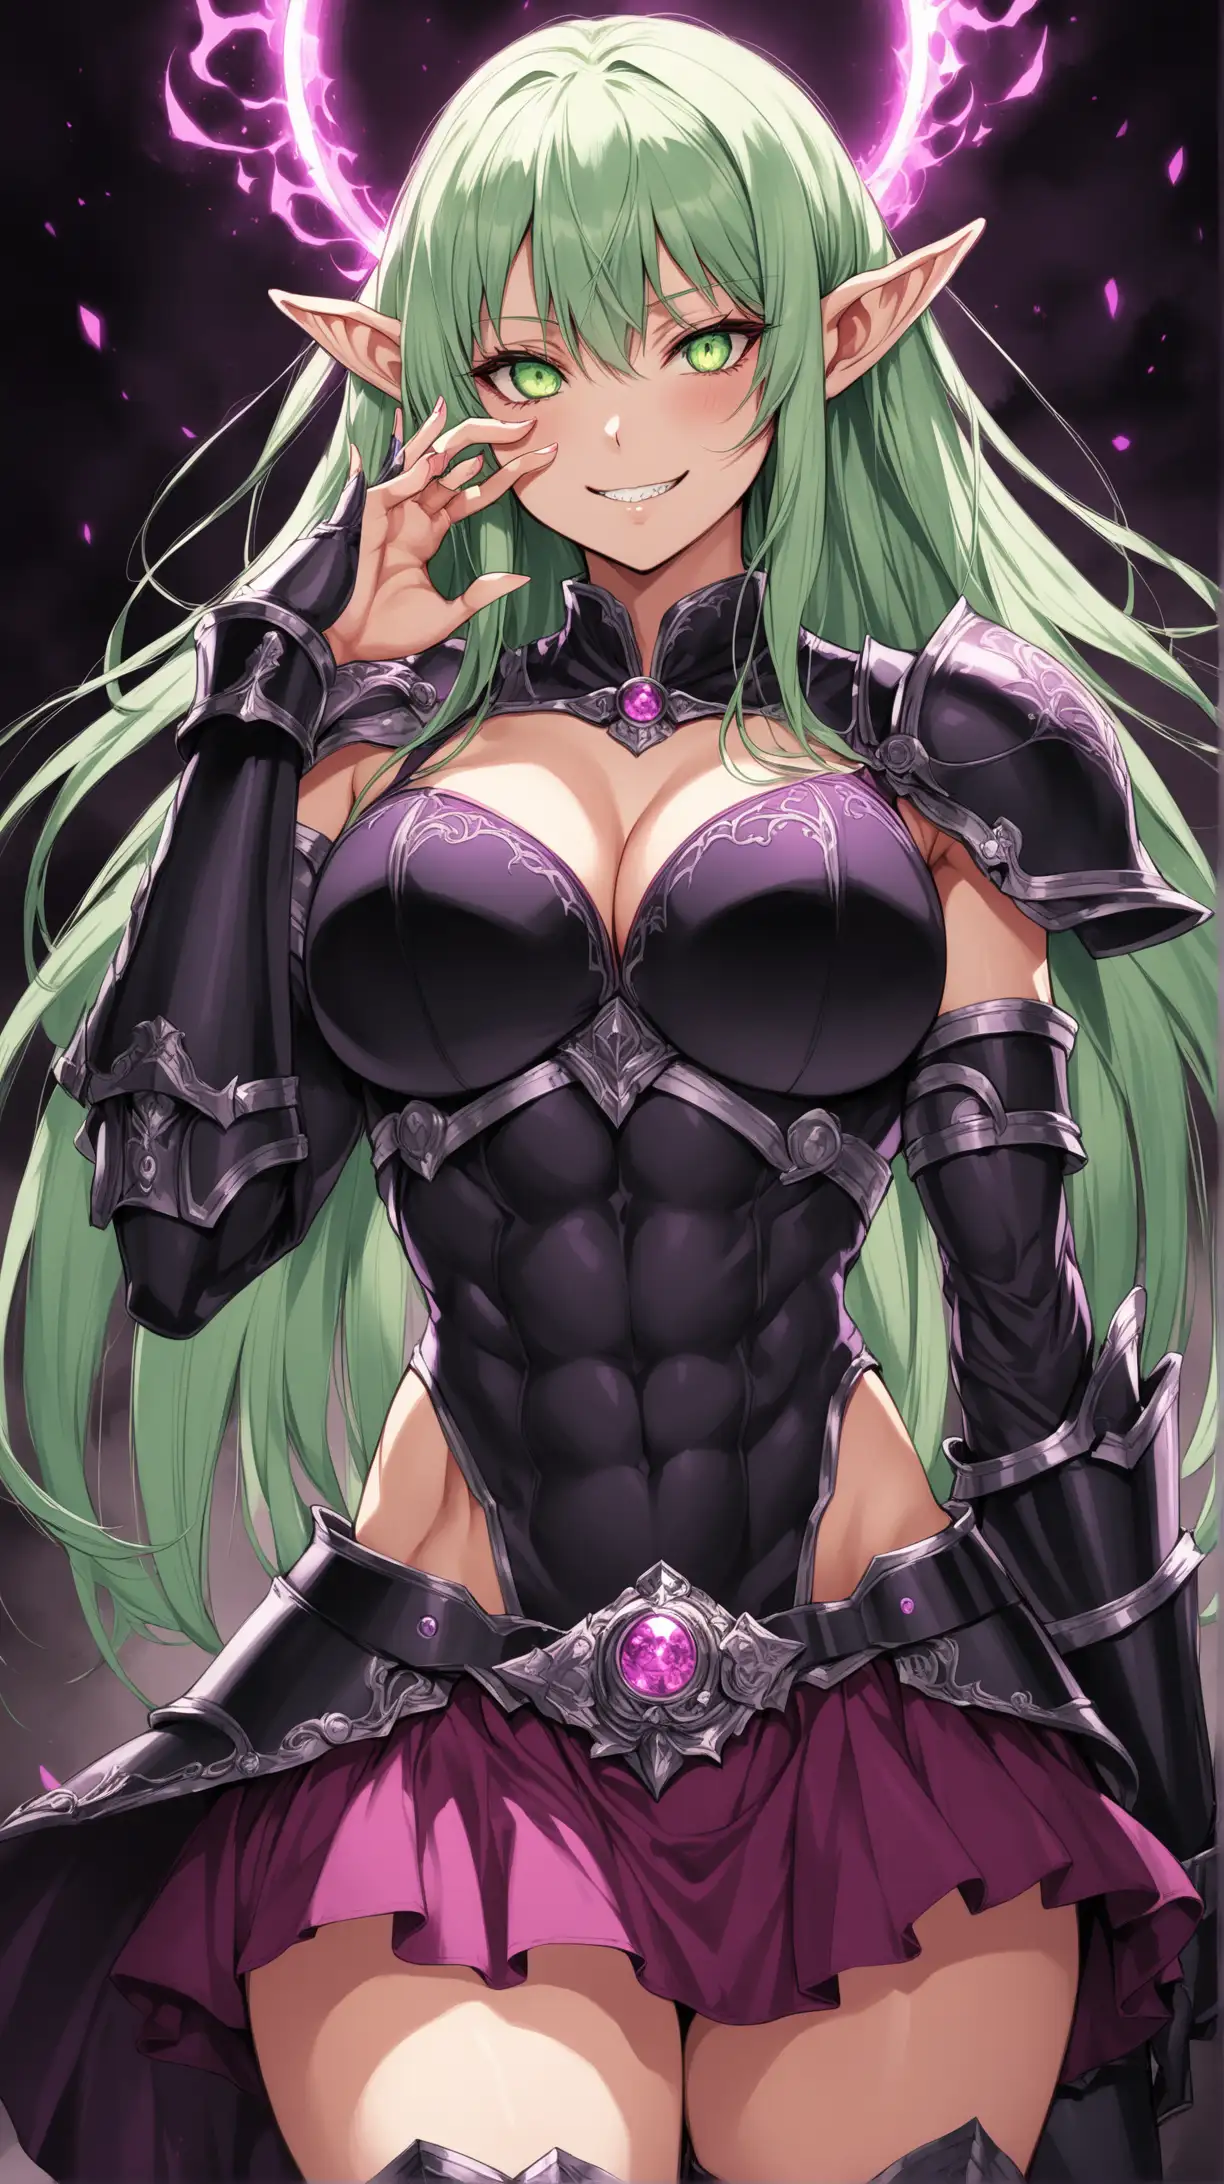 Create an illustration of a formidable female elf, her intense, possessive expression reminiscent of Yuno Gasai from "Future Diary." Her glowing green eyes, wide open with madness, capture the essence of the iconic gapmoe yandere trope with a chilling wide grin that stretches across her face. Make her eyes huge and luminous, conveying a sense of sadness akin to characters from "Future Diary," but with a grimdark twist.

Focus on her muscular physique, particularly her well-defined abs, as she stands adorned in dark, gothic black leather armor with purple accents. Include a long dark red skirt, bracers, greaves, pauldrons, and hip armor for added protection. Let her mint green hair flow freely down to her feet, contrasting vibrantly against the dark backdrop.

Adorn her head with a unique purple glowing halo attachment, designed to hover behind her and emanate a sinister aura reminiscent of her menacing presence. Ensure she exudes a menacing presence, reflecting her dangerous nature, with long elf ears and the distinctive purple glowing halo floating above her head.

Illustrate her hands with four fingers and a thumb, her right hand caressing her cheek to emphasize her expression of madness and possessiveness, while her left hand gently trails down to caress her defined abs, showcasing her power and allure. Depict her with a sense of close-up intimacy within a dark fantasy setting that complements her aesthetic.

Capture the dynamic and detailed art style of "Bastard!!," with vibrant colors and intricate linework. In a full-body shot, emphasize her entire figure, showcasing cleavage, large breasts, and six-pack abs, portraying her as a formidable warrior ready for battle.